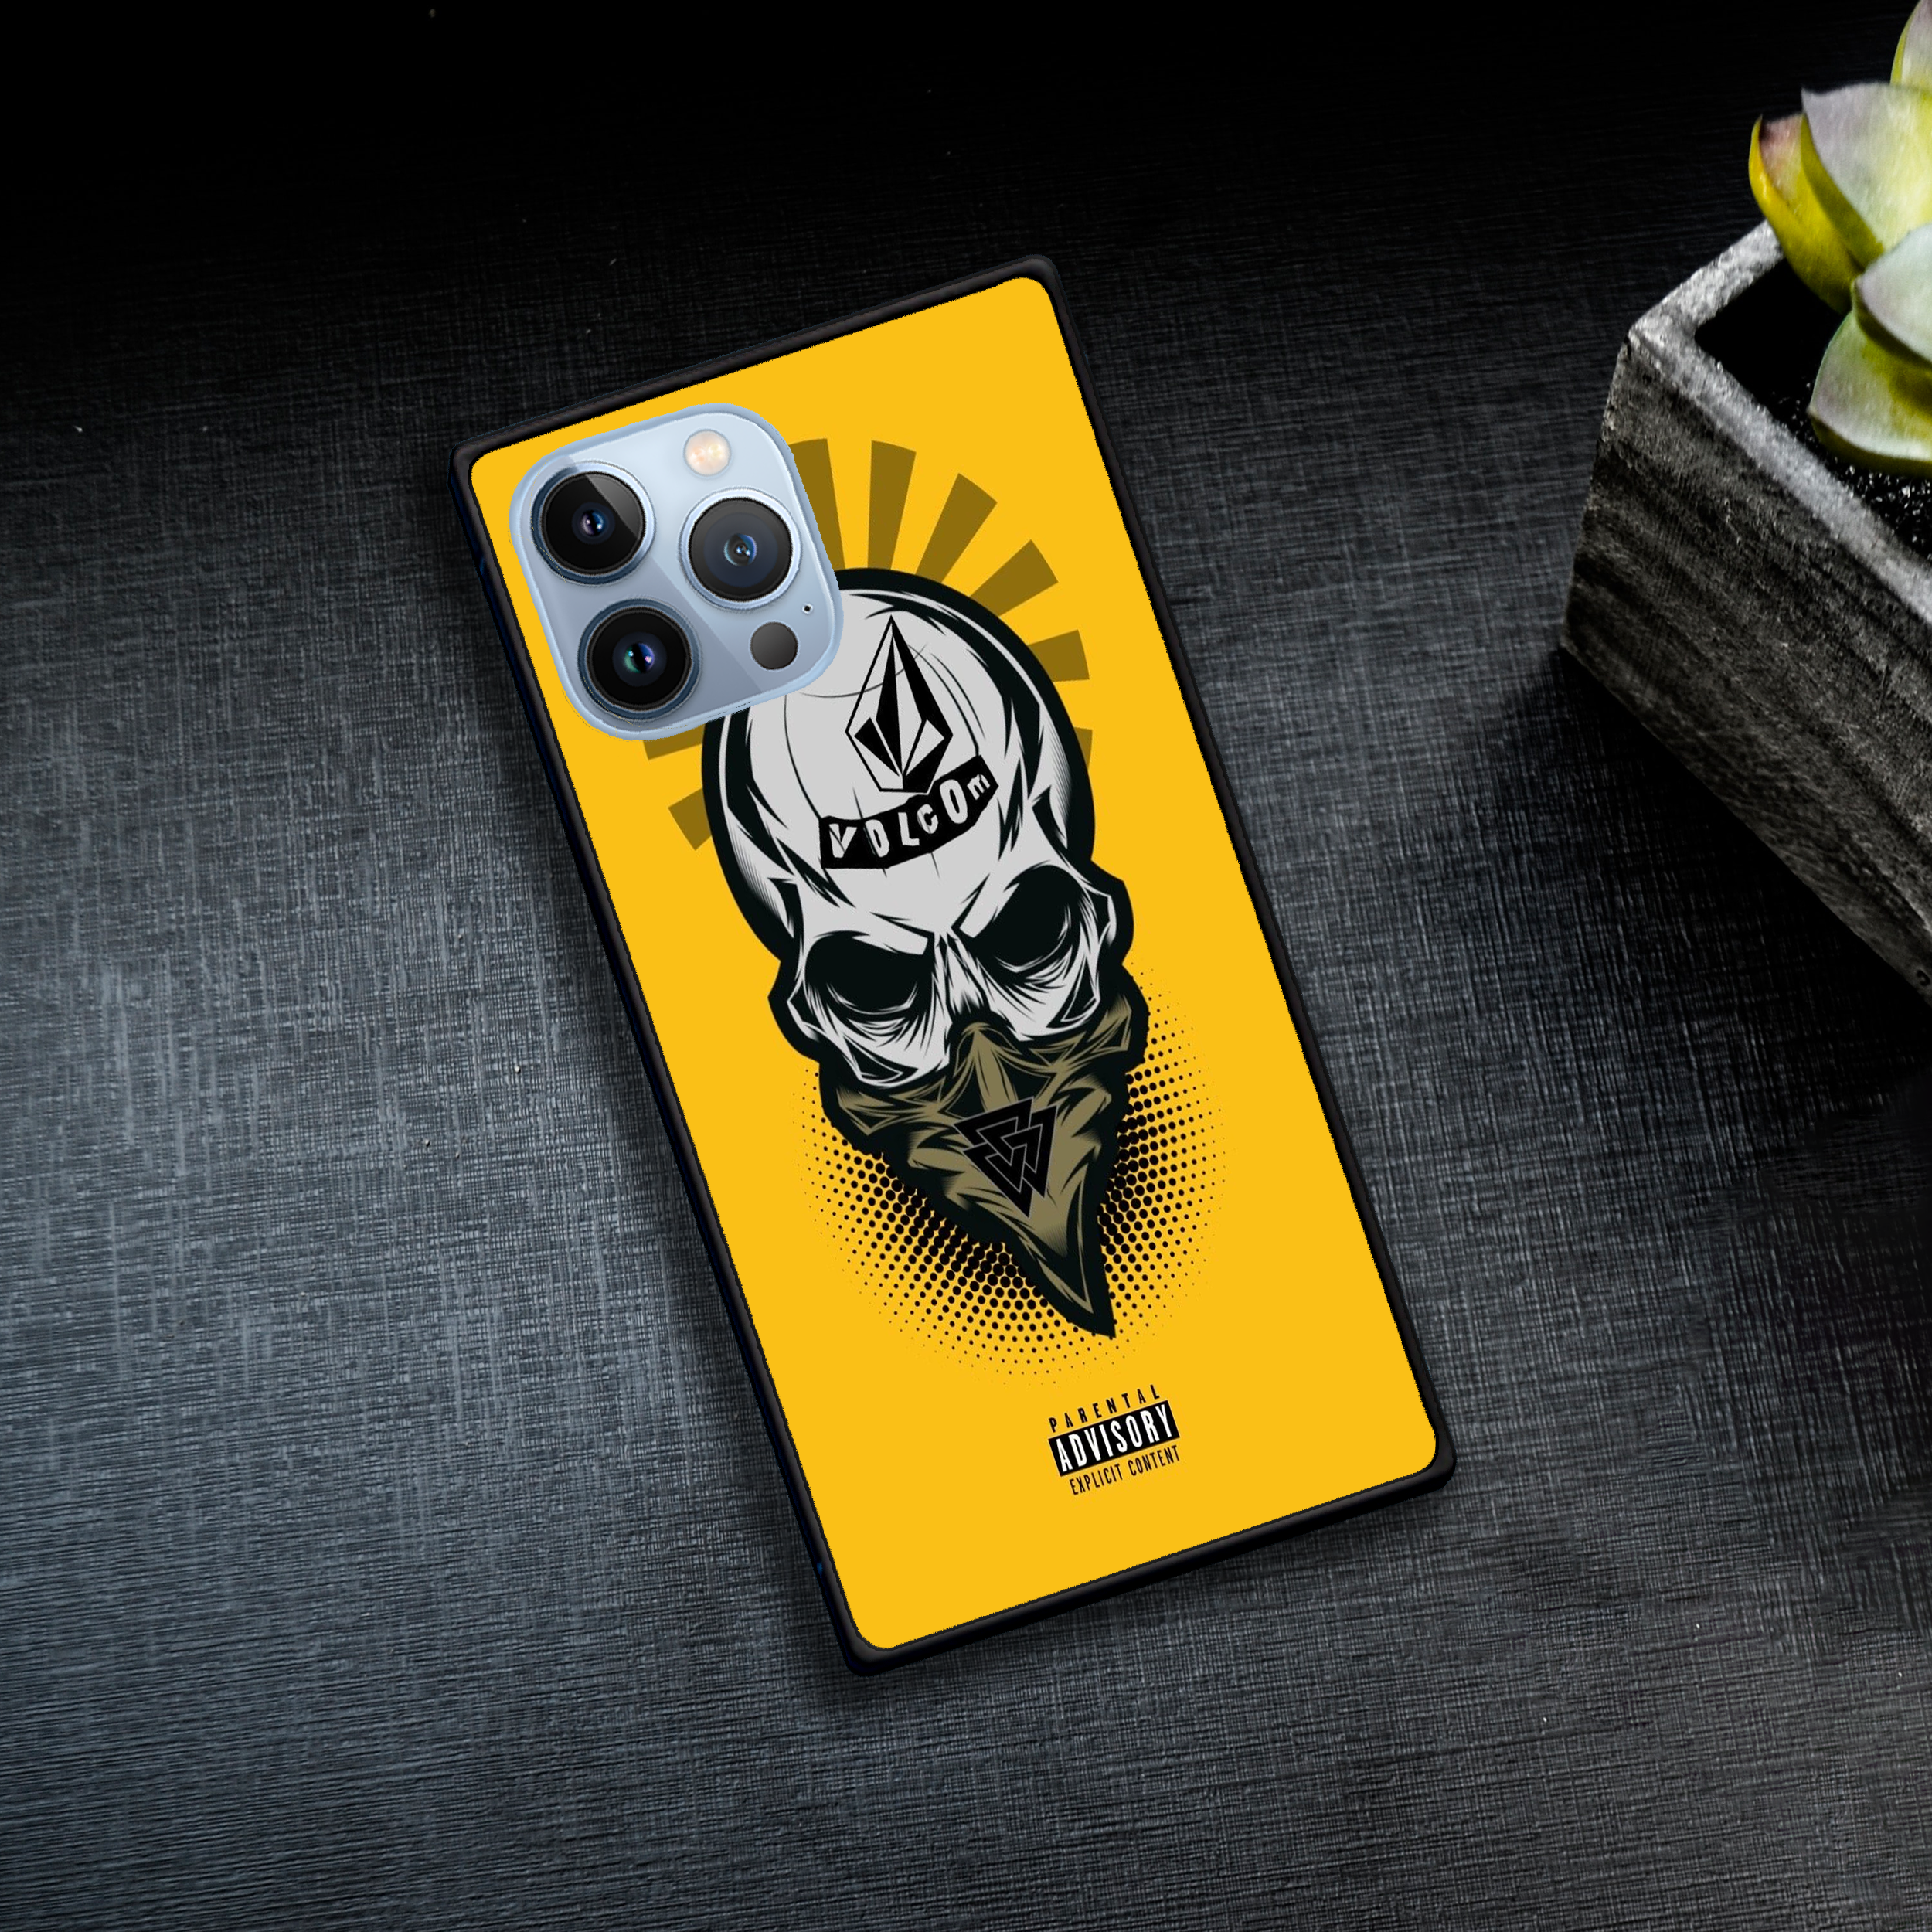 Square Glass Yellow Skeleton Case For iPhone